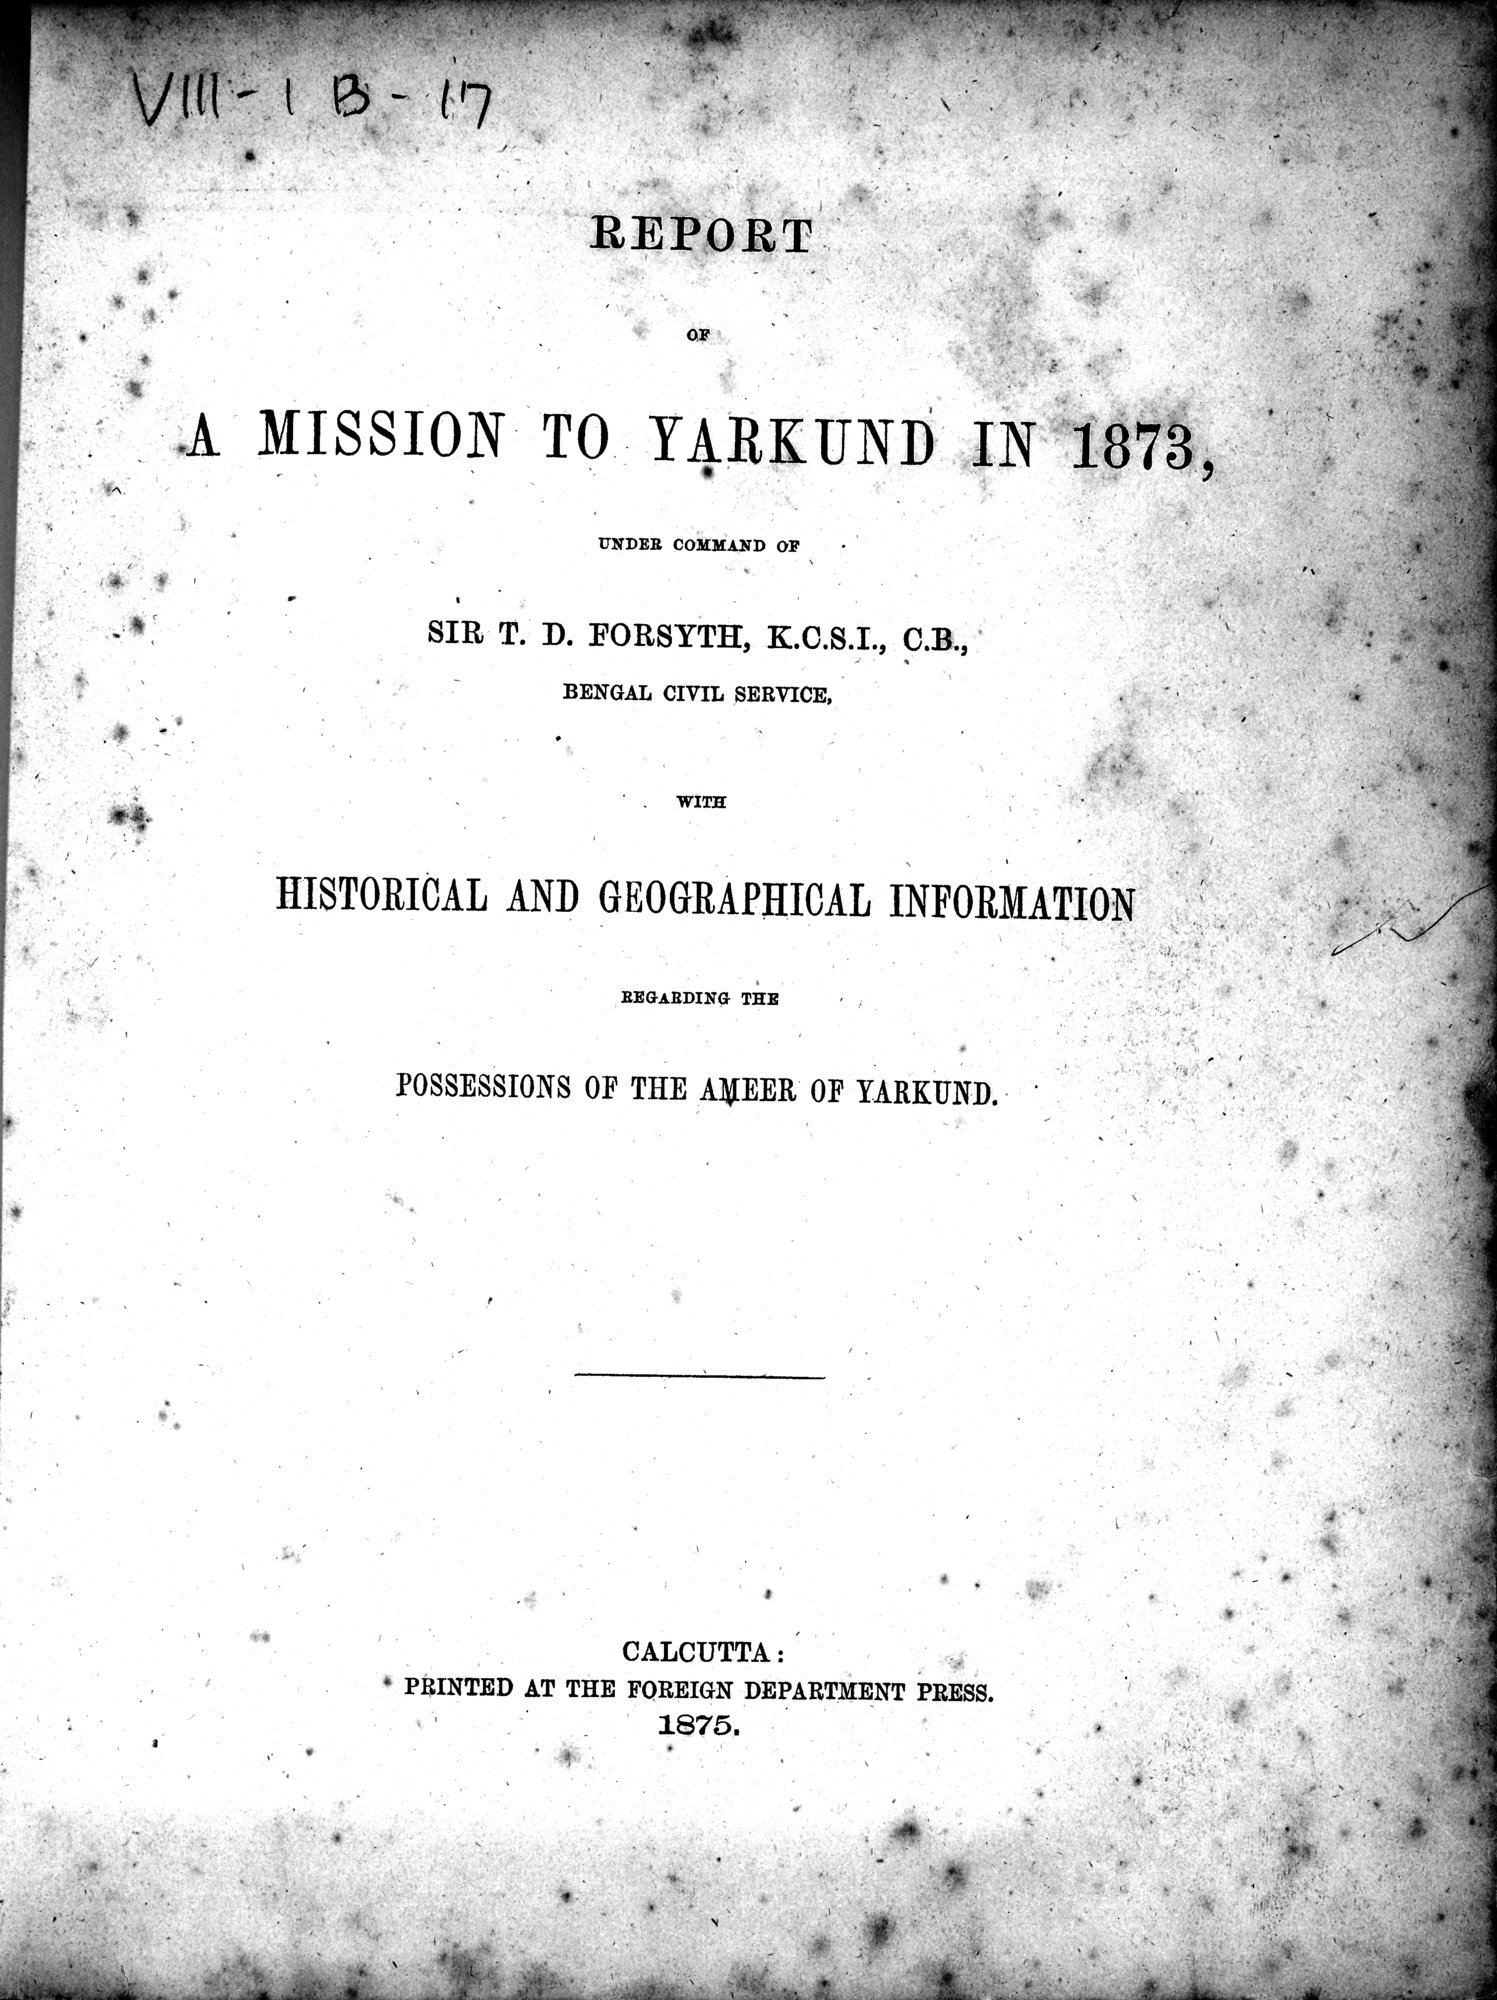 Report of a Mission to Yarkund in 1873 : vol.1 / Page 9 (Grayscale High Resolution Image)